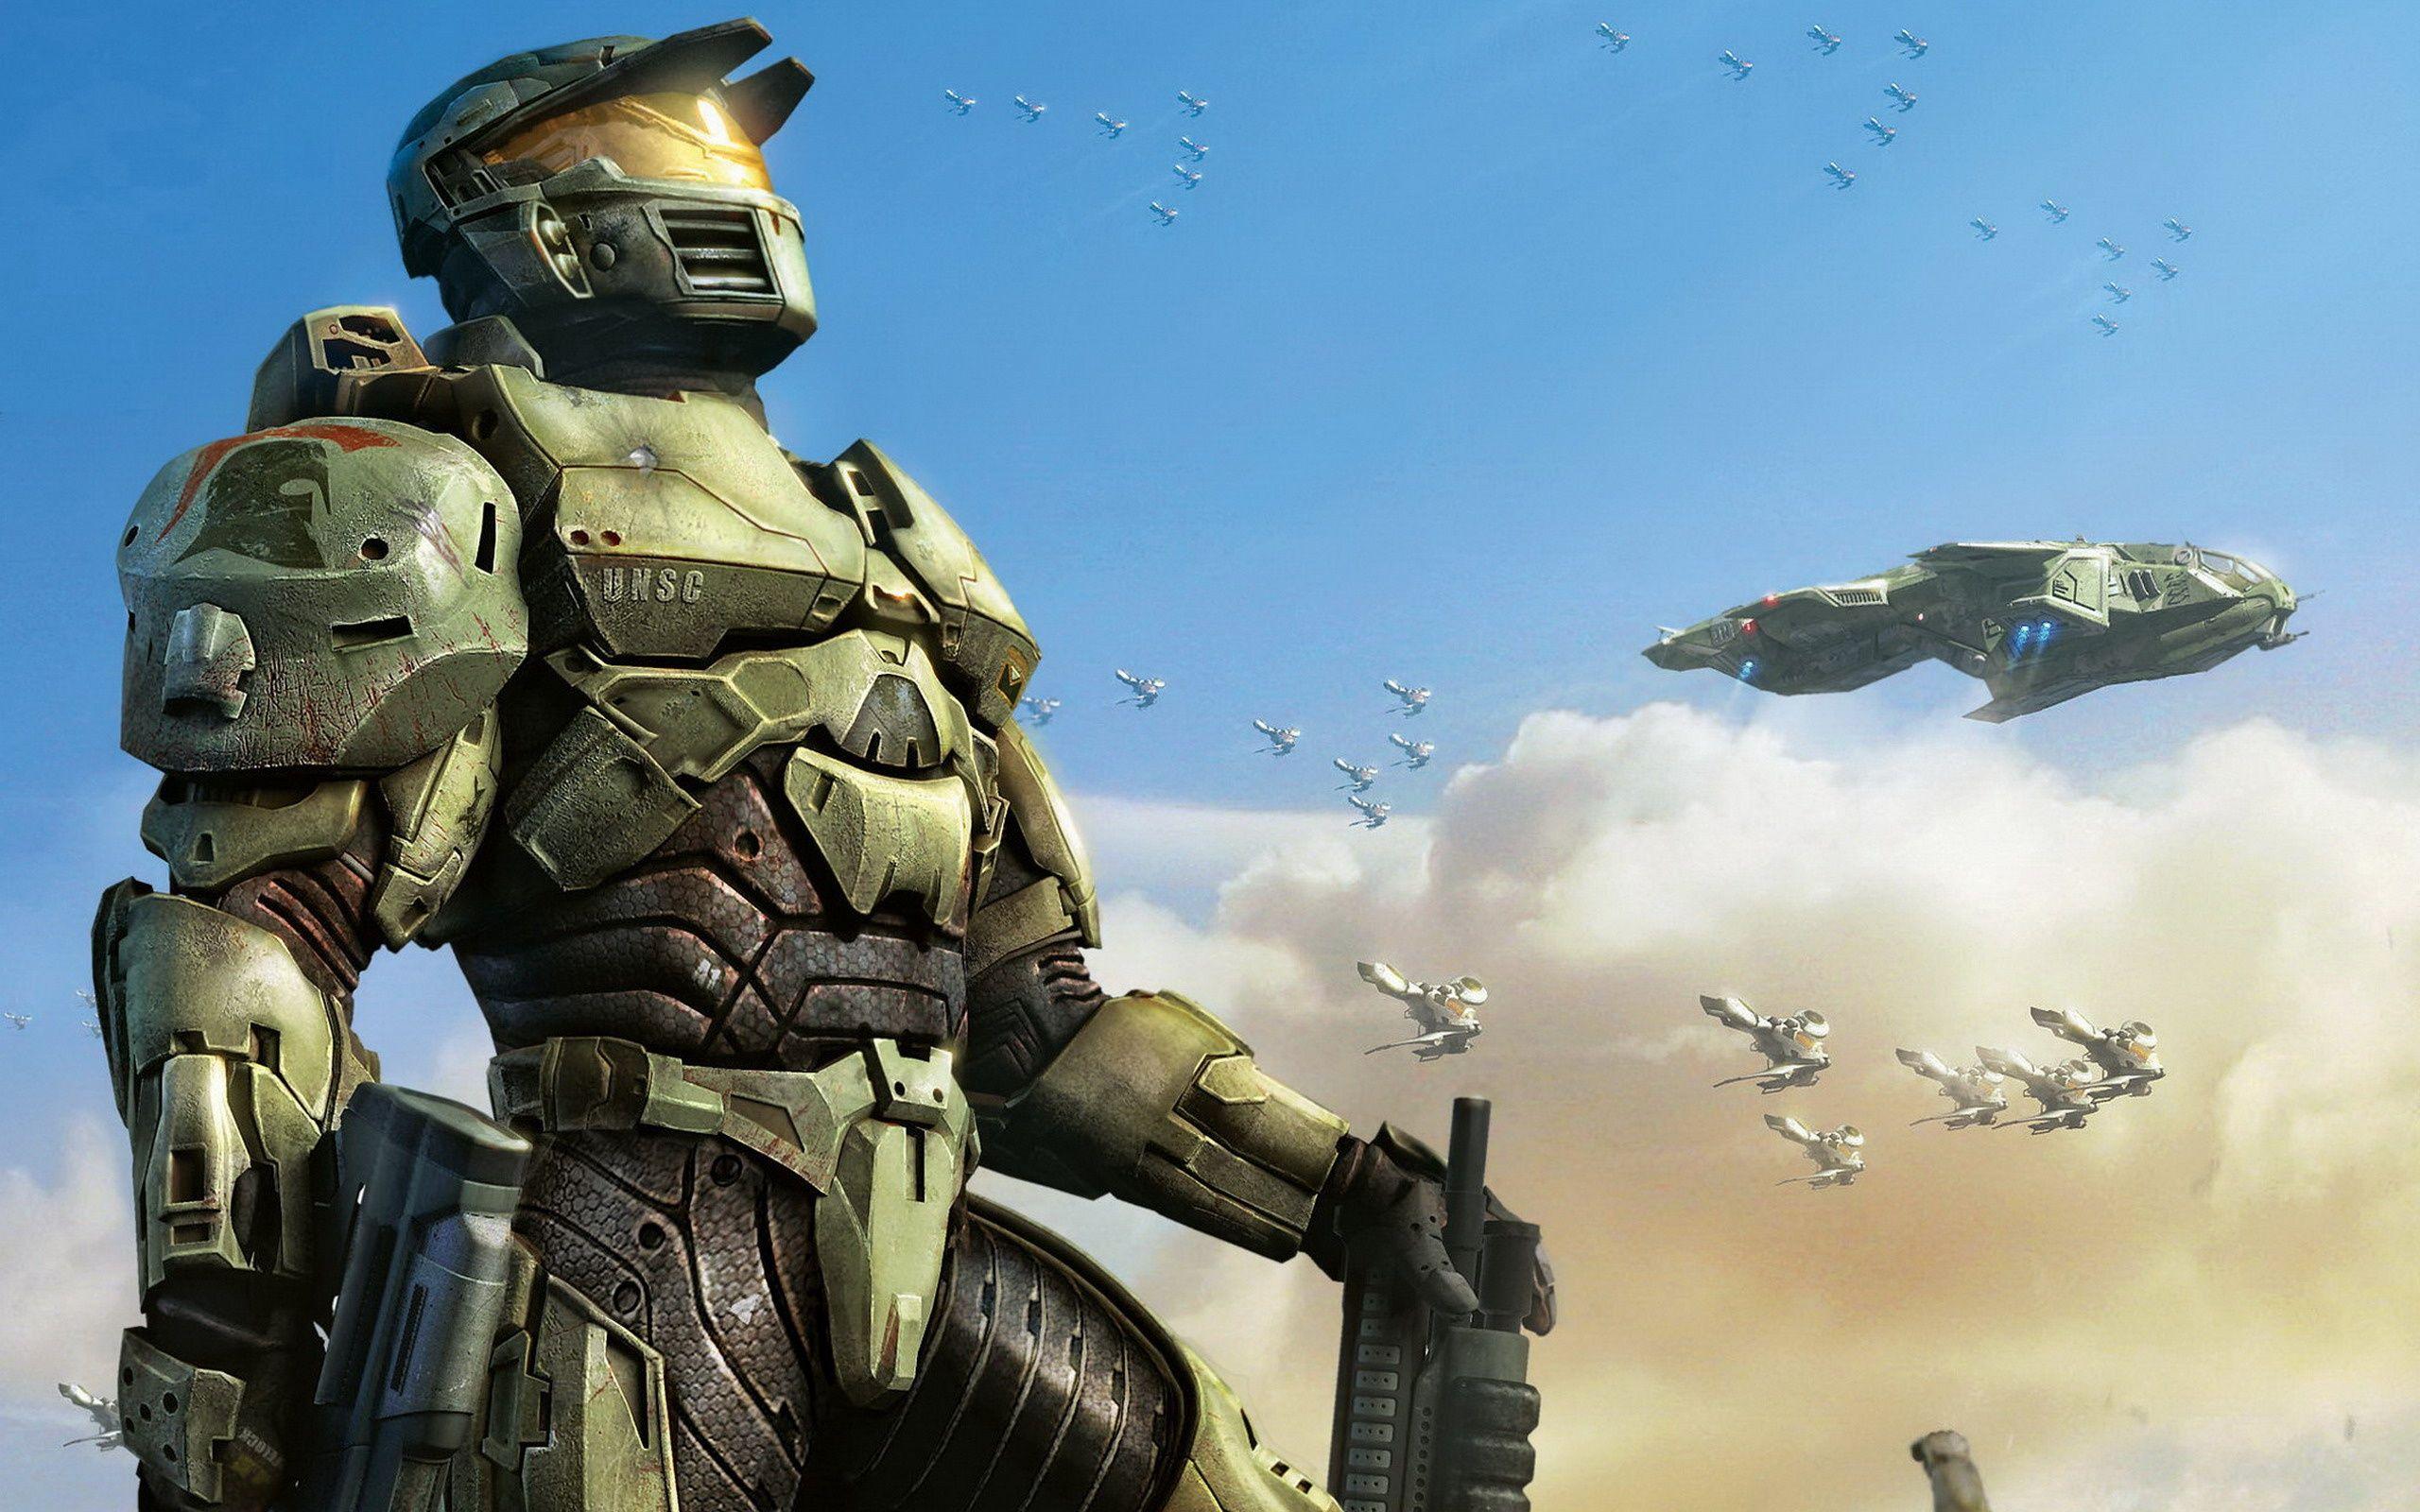 Halo Wars New Game Wallpaper in jpg format for free download